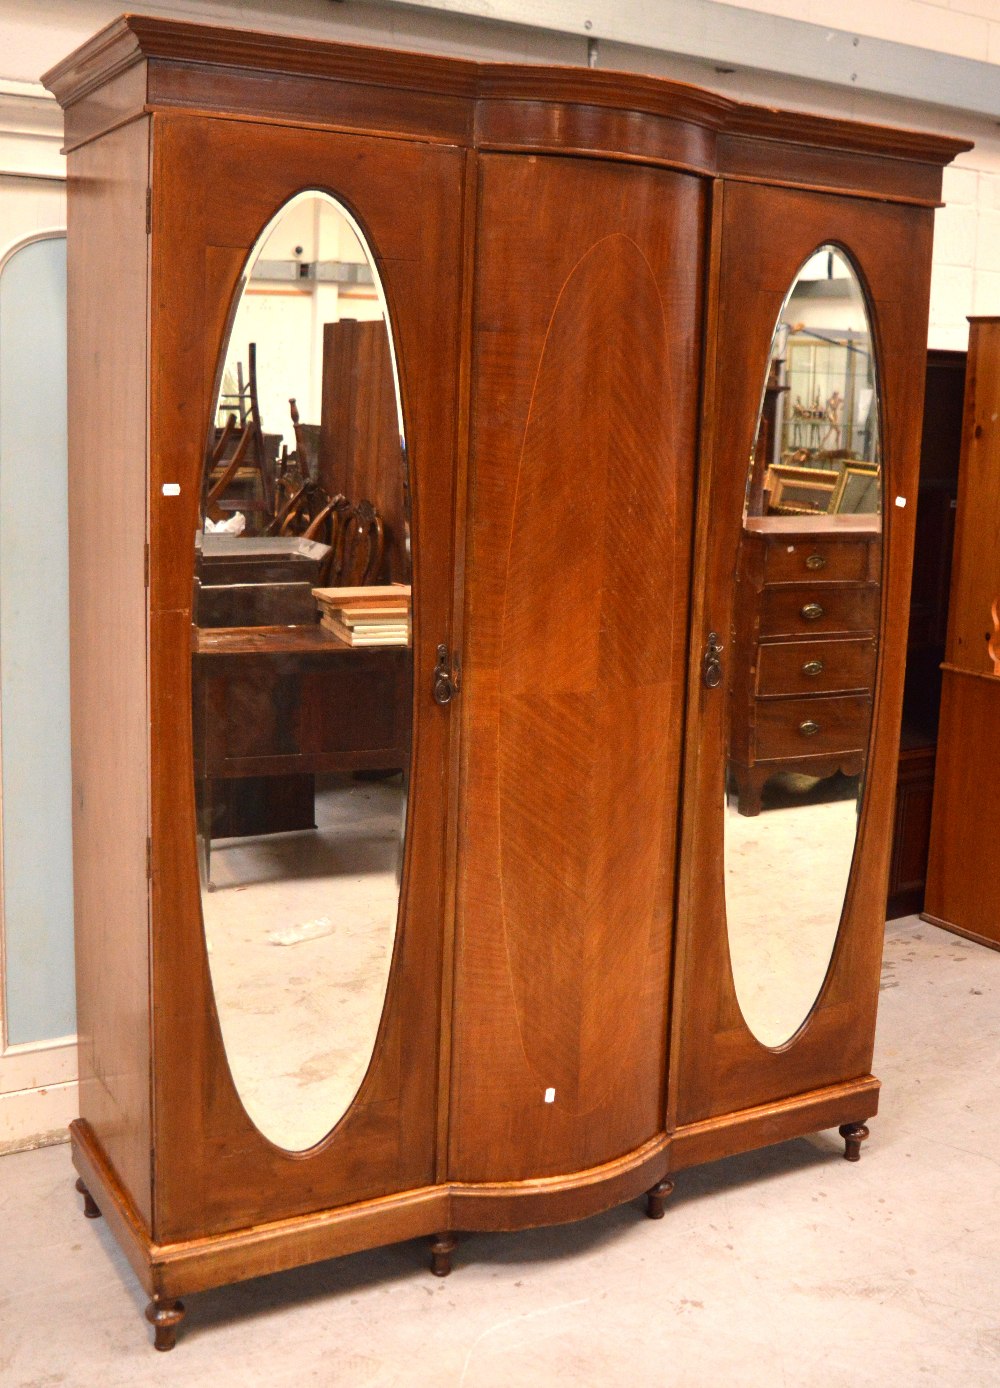 An Edwardian mahogany inlaid triple-door wardrobe with central bow-front panel and two mirrored